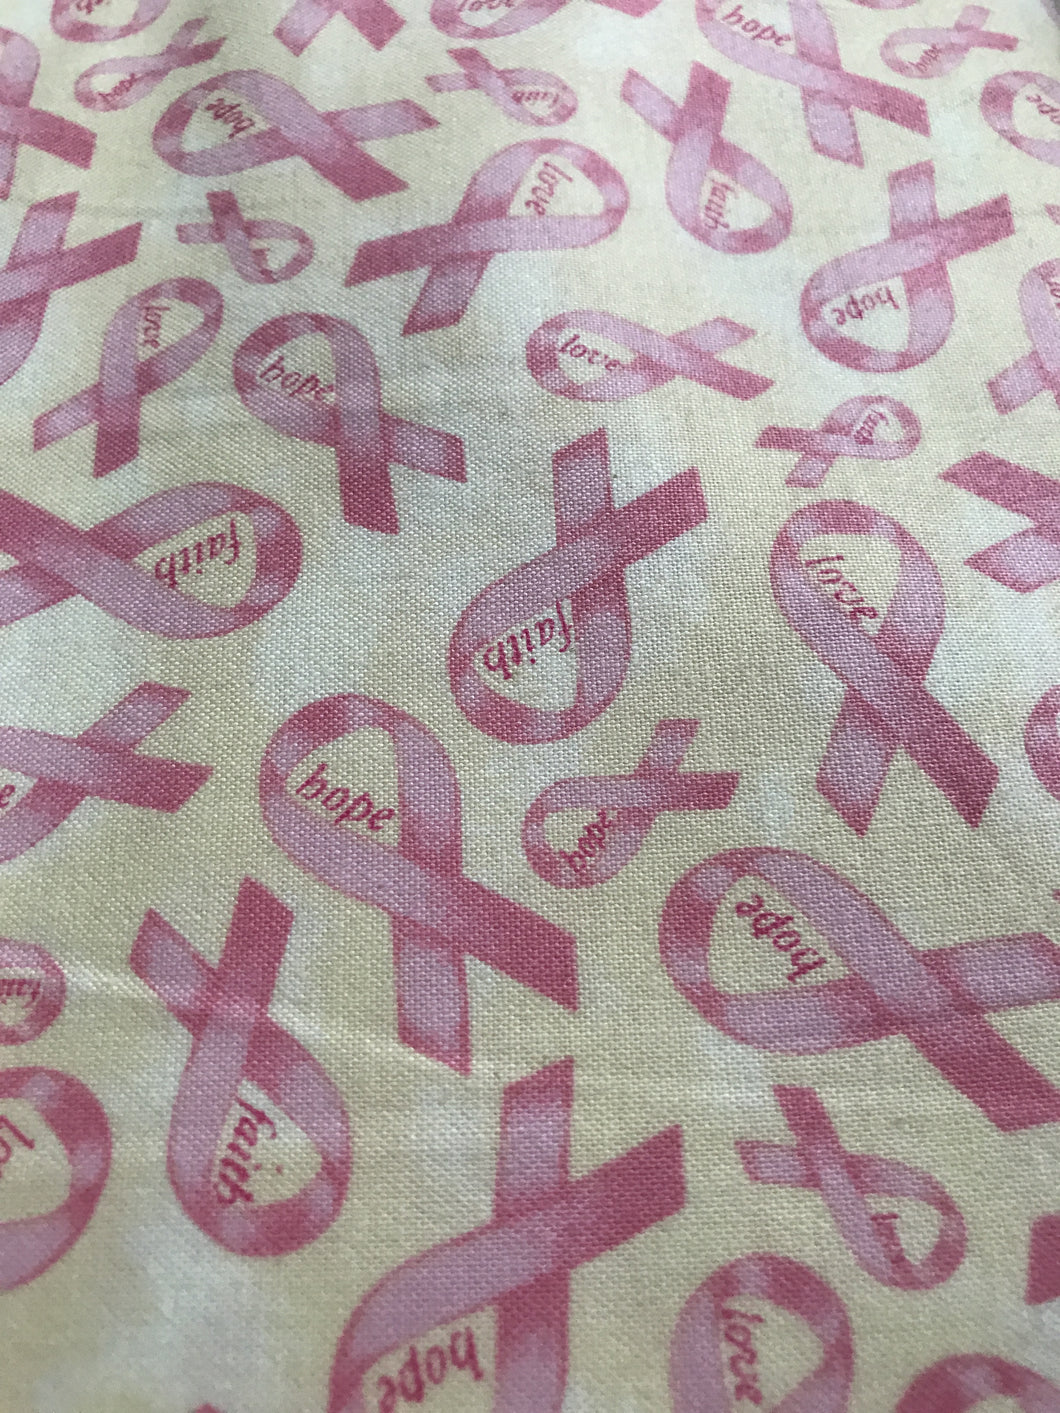 Breast Cancer Pink Ribbons Fabric